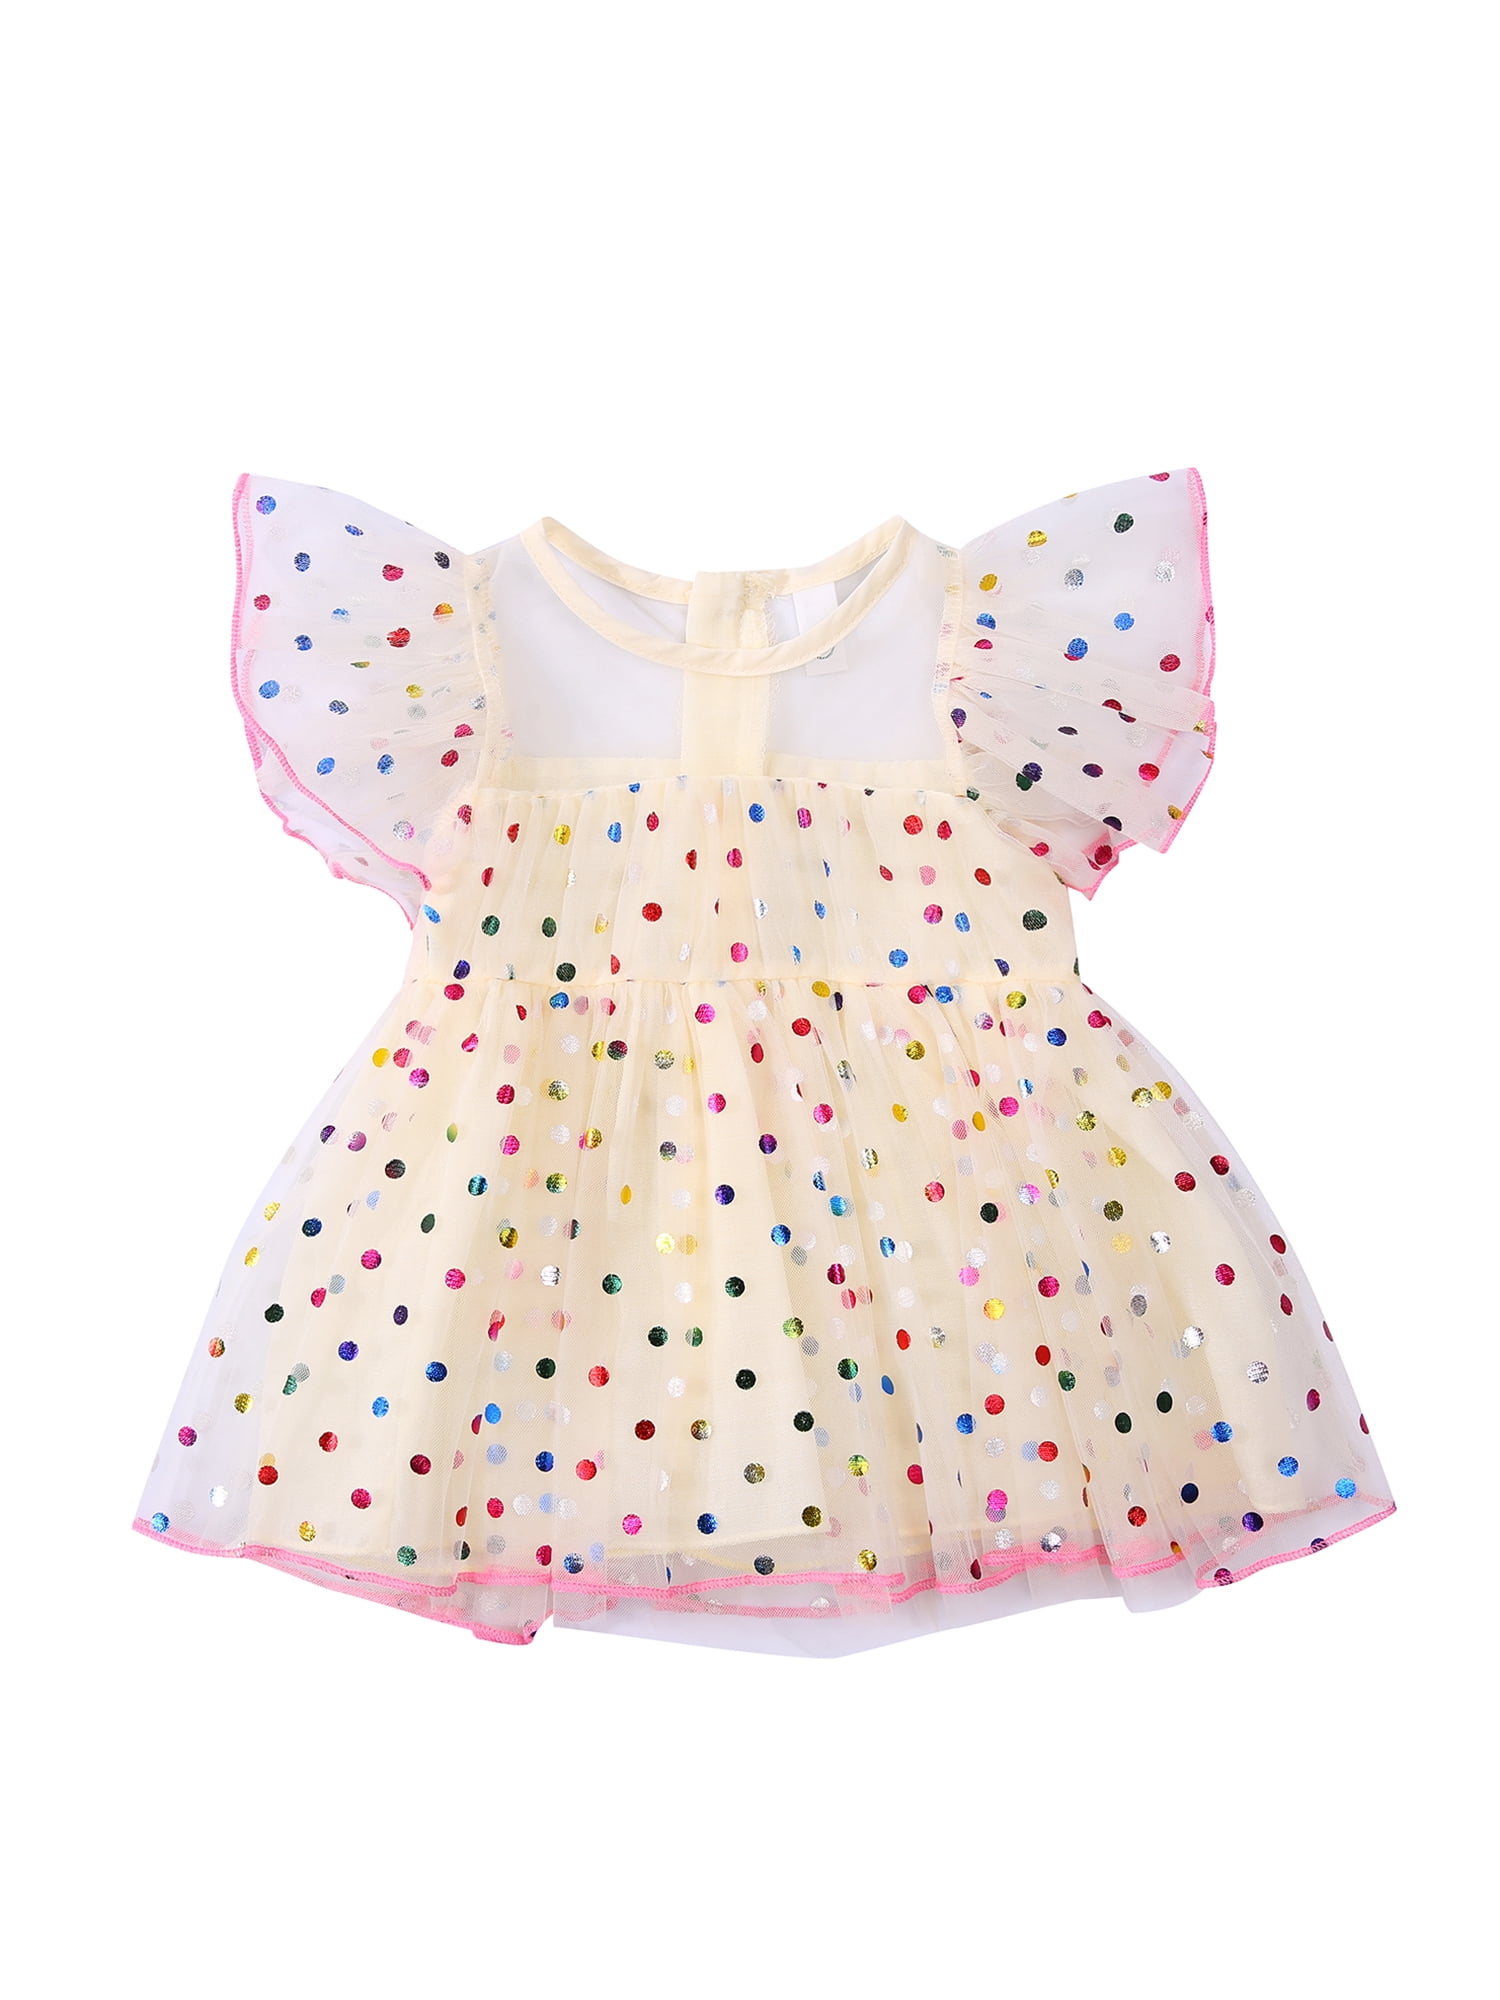 NEW 1pc CARTER'S Polka Dot KITTY CAT Sunsuit OUTFIT Romper Sz 9 12 18 24 mo NWT 